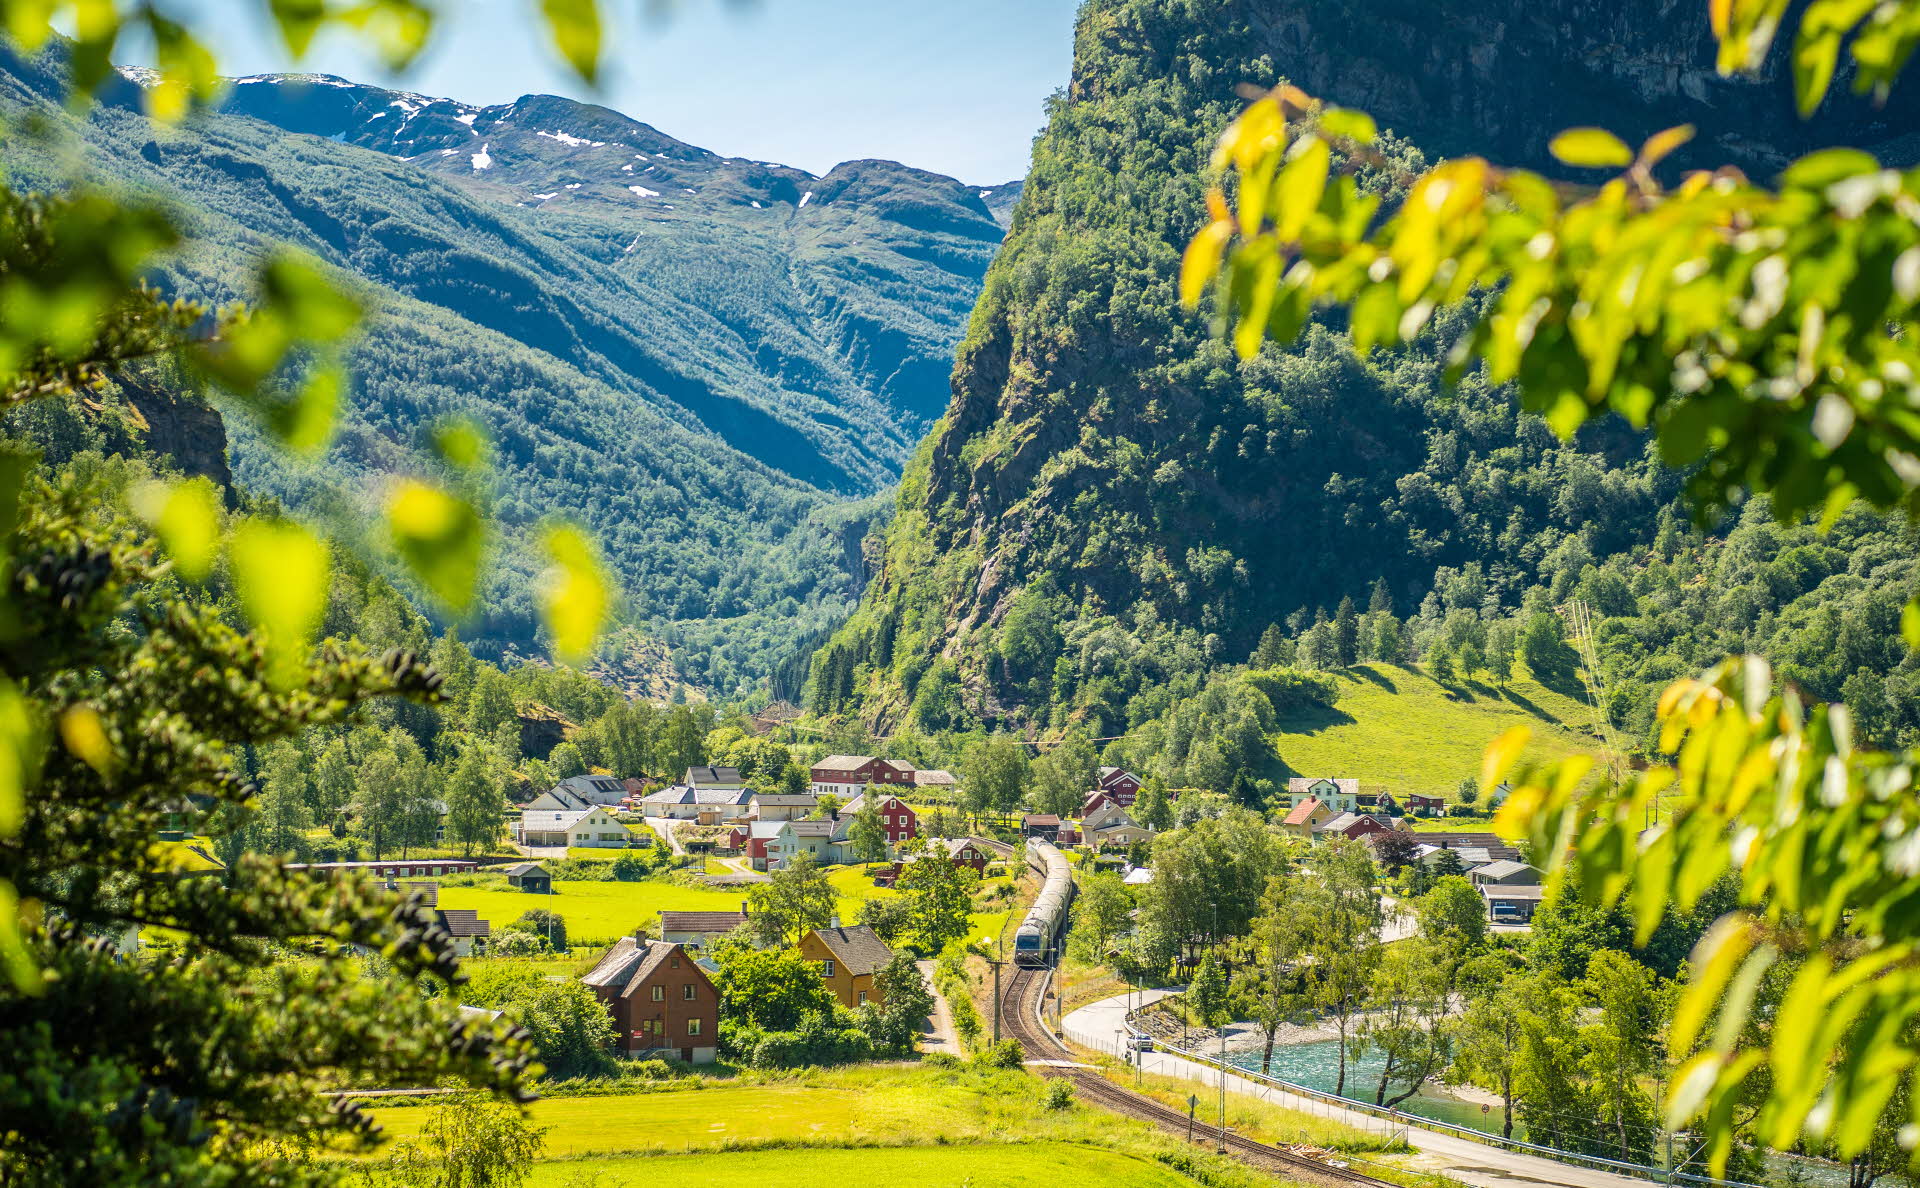 The Flåm Railway passing through the old Flåm village centre on a lush summer’s day.